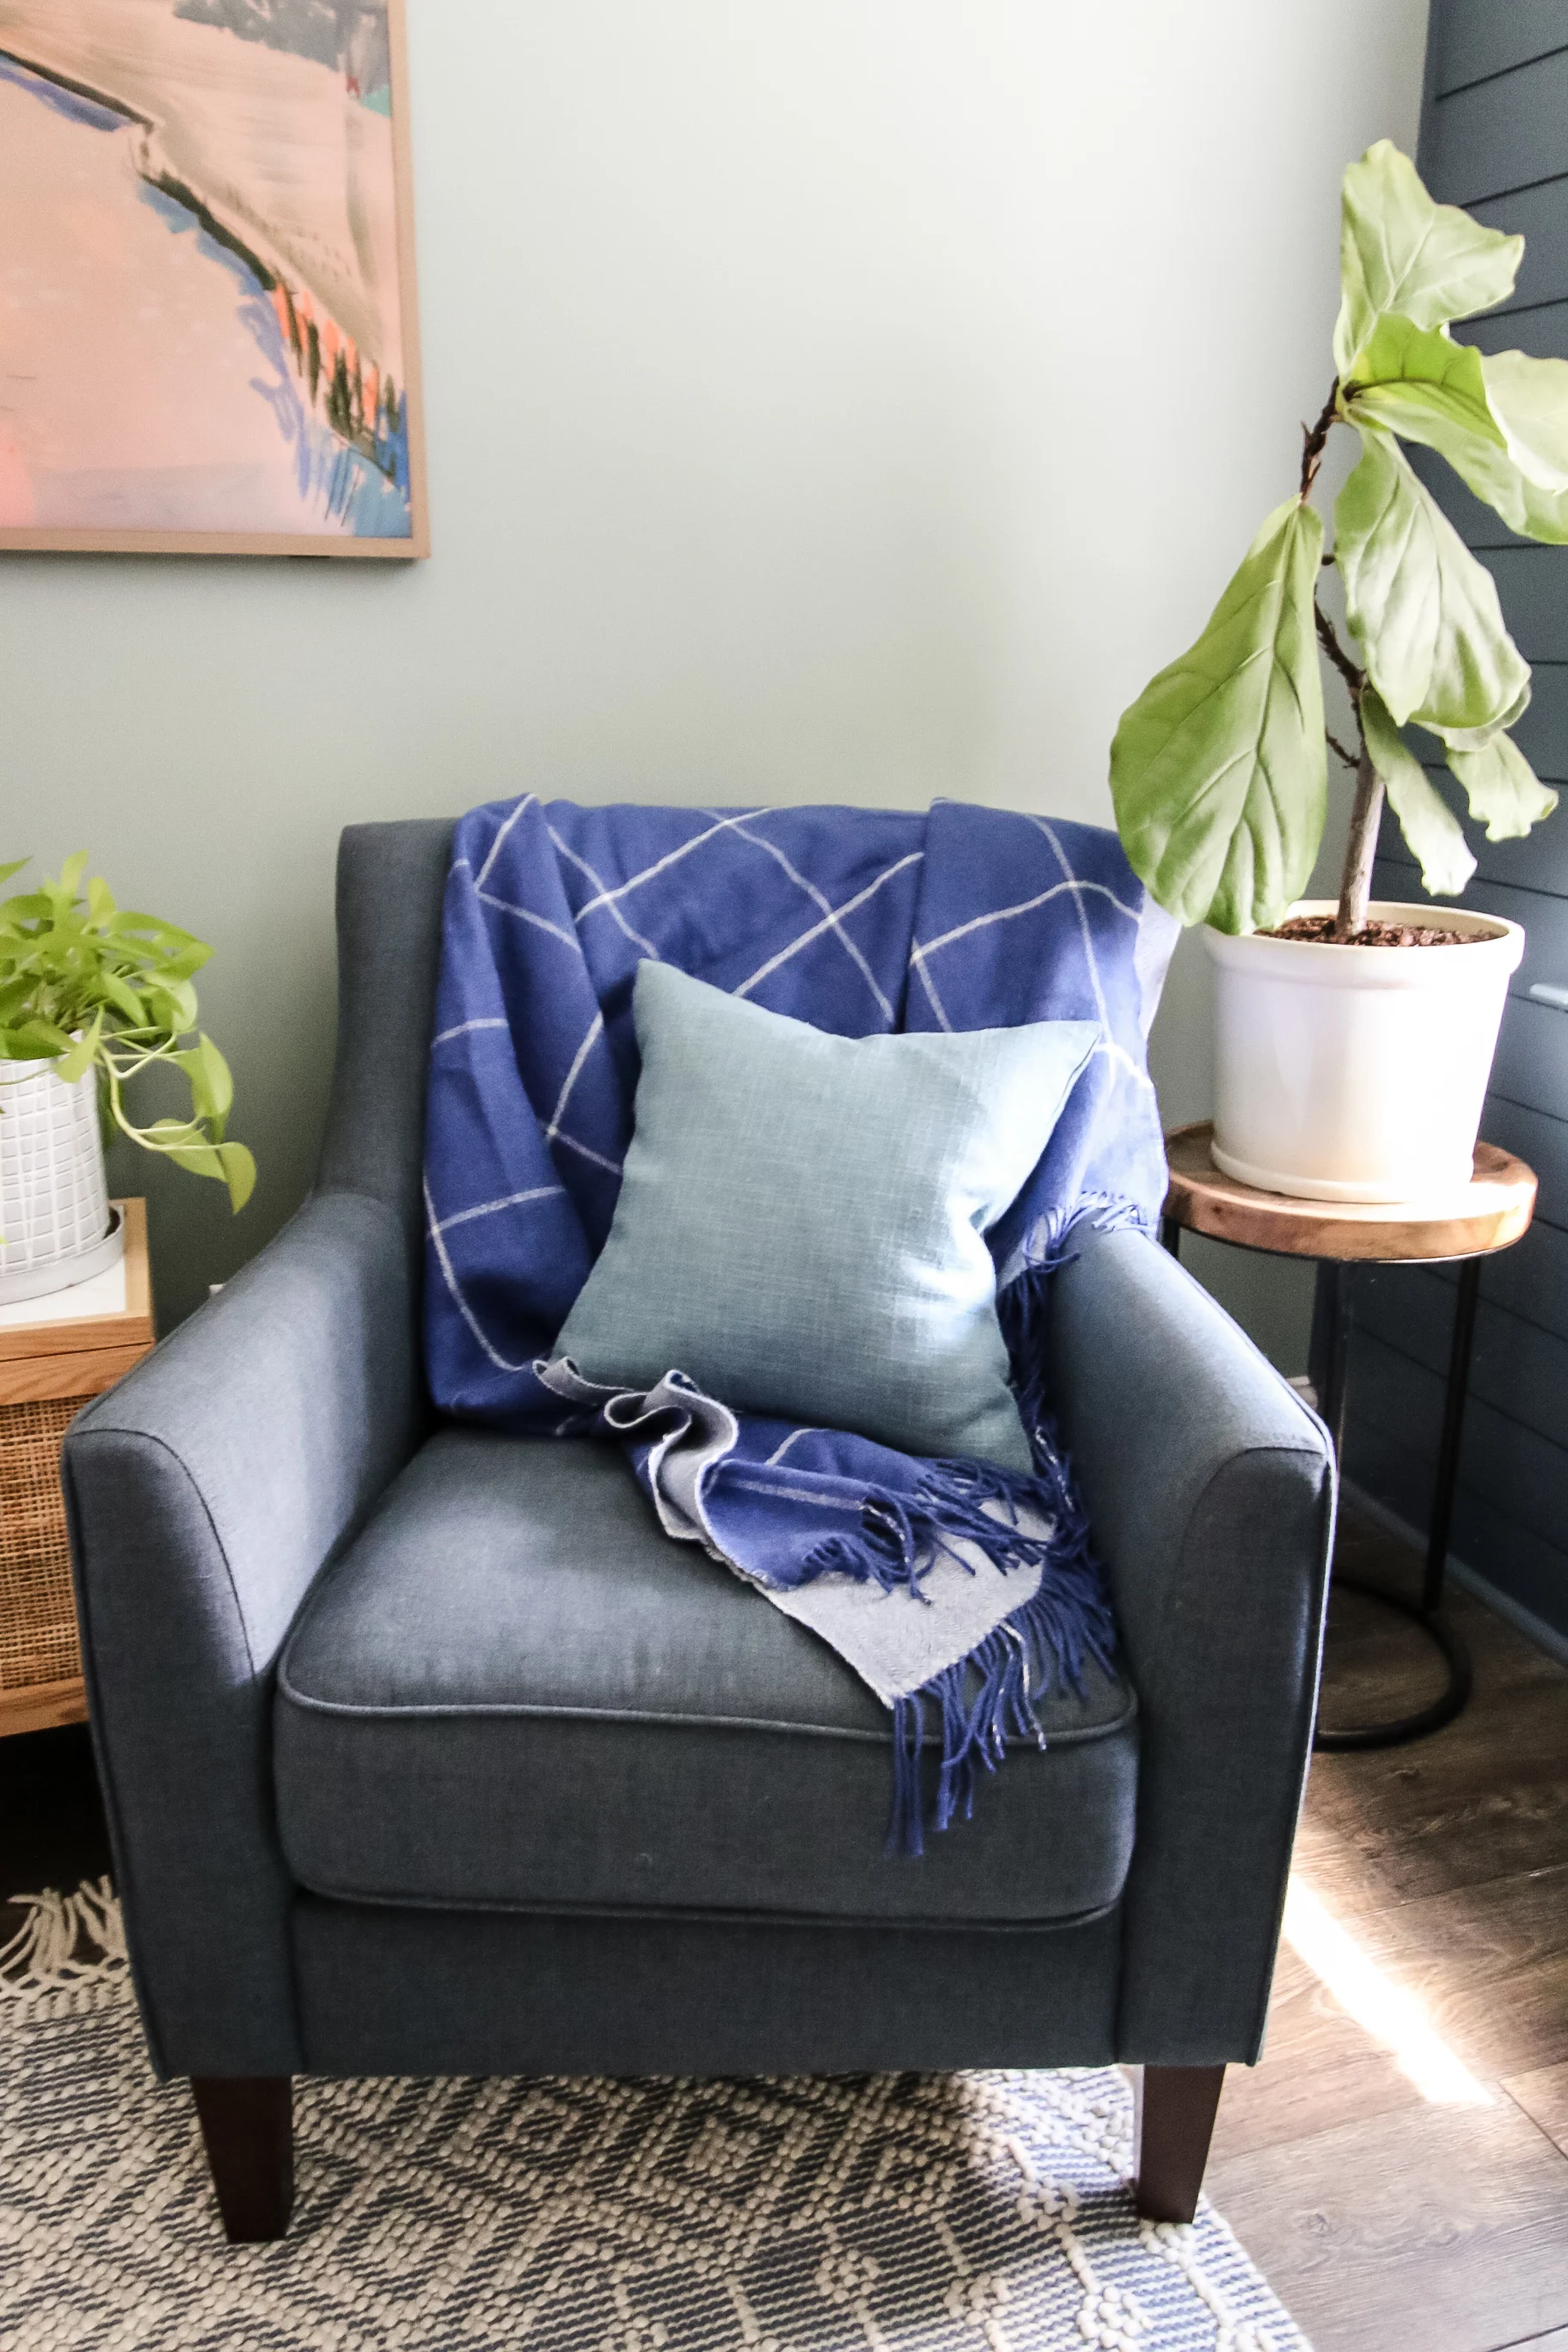 blanket folded on a chair with throw pillow